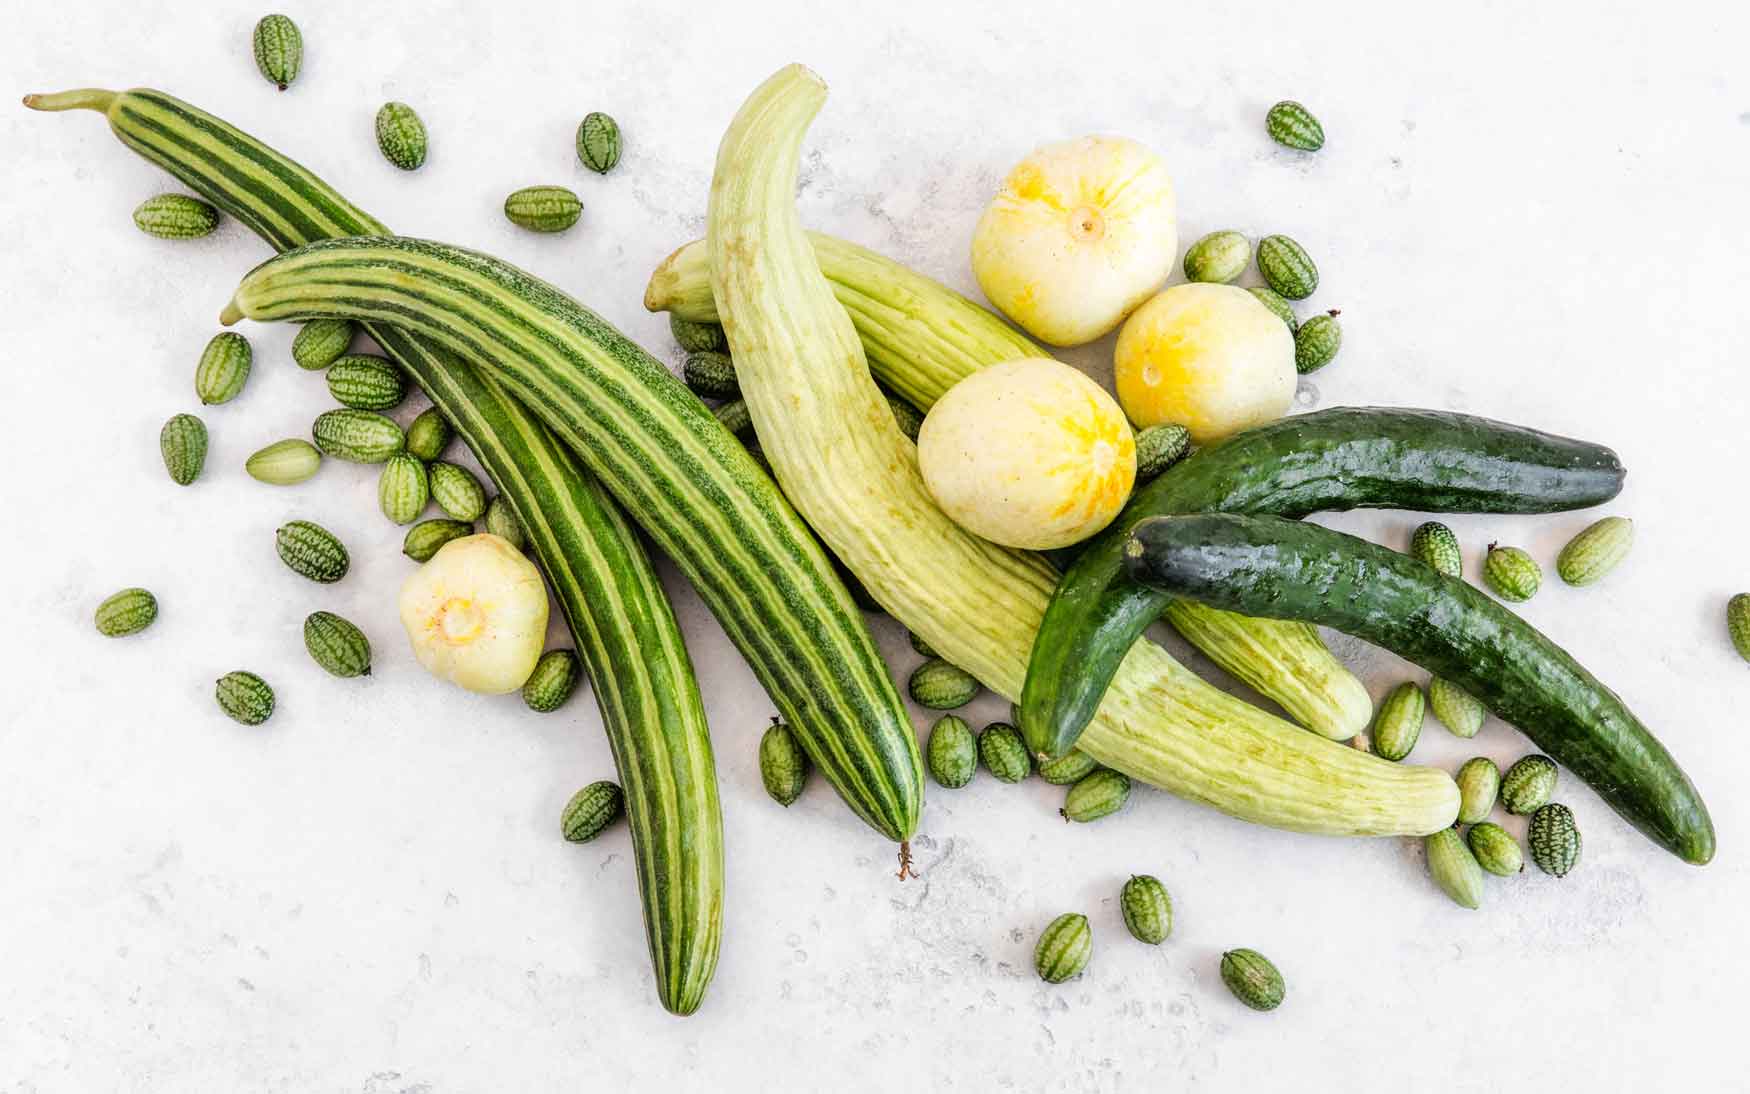 Get acquainted with different types of cucumbers